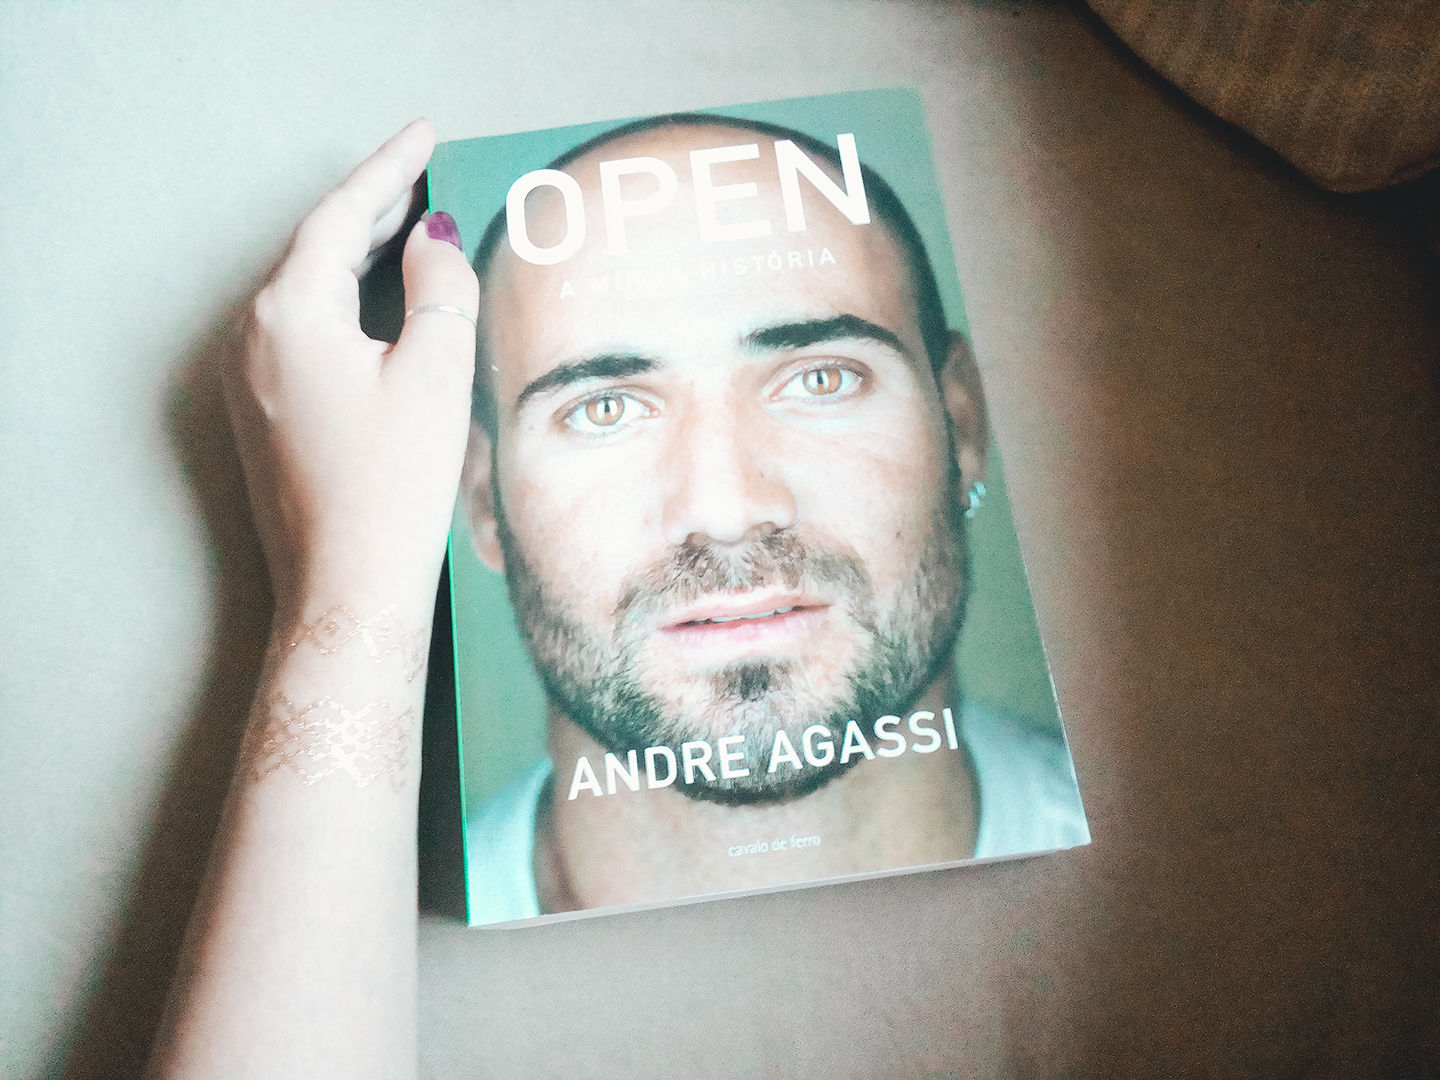 open andre agassi